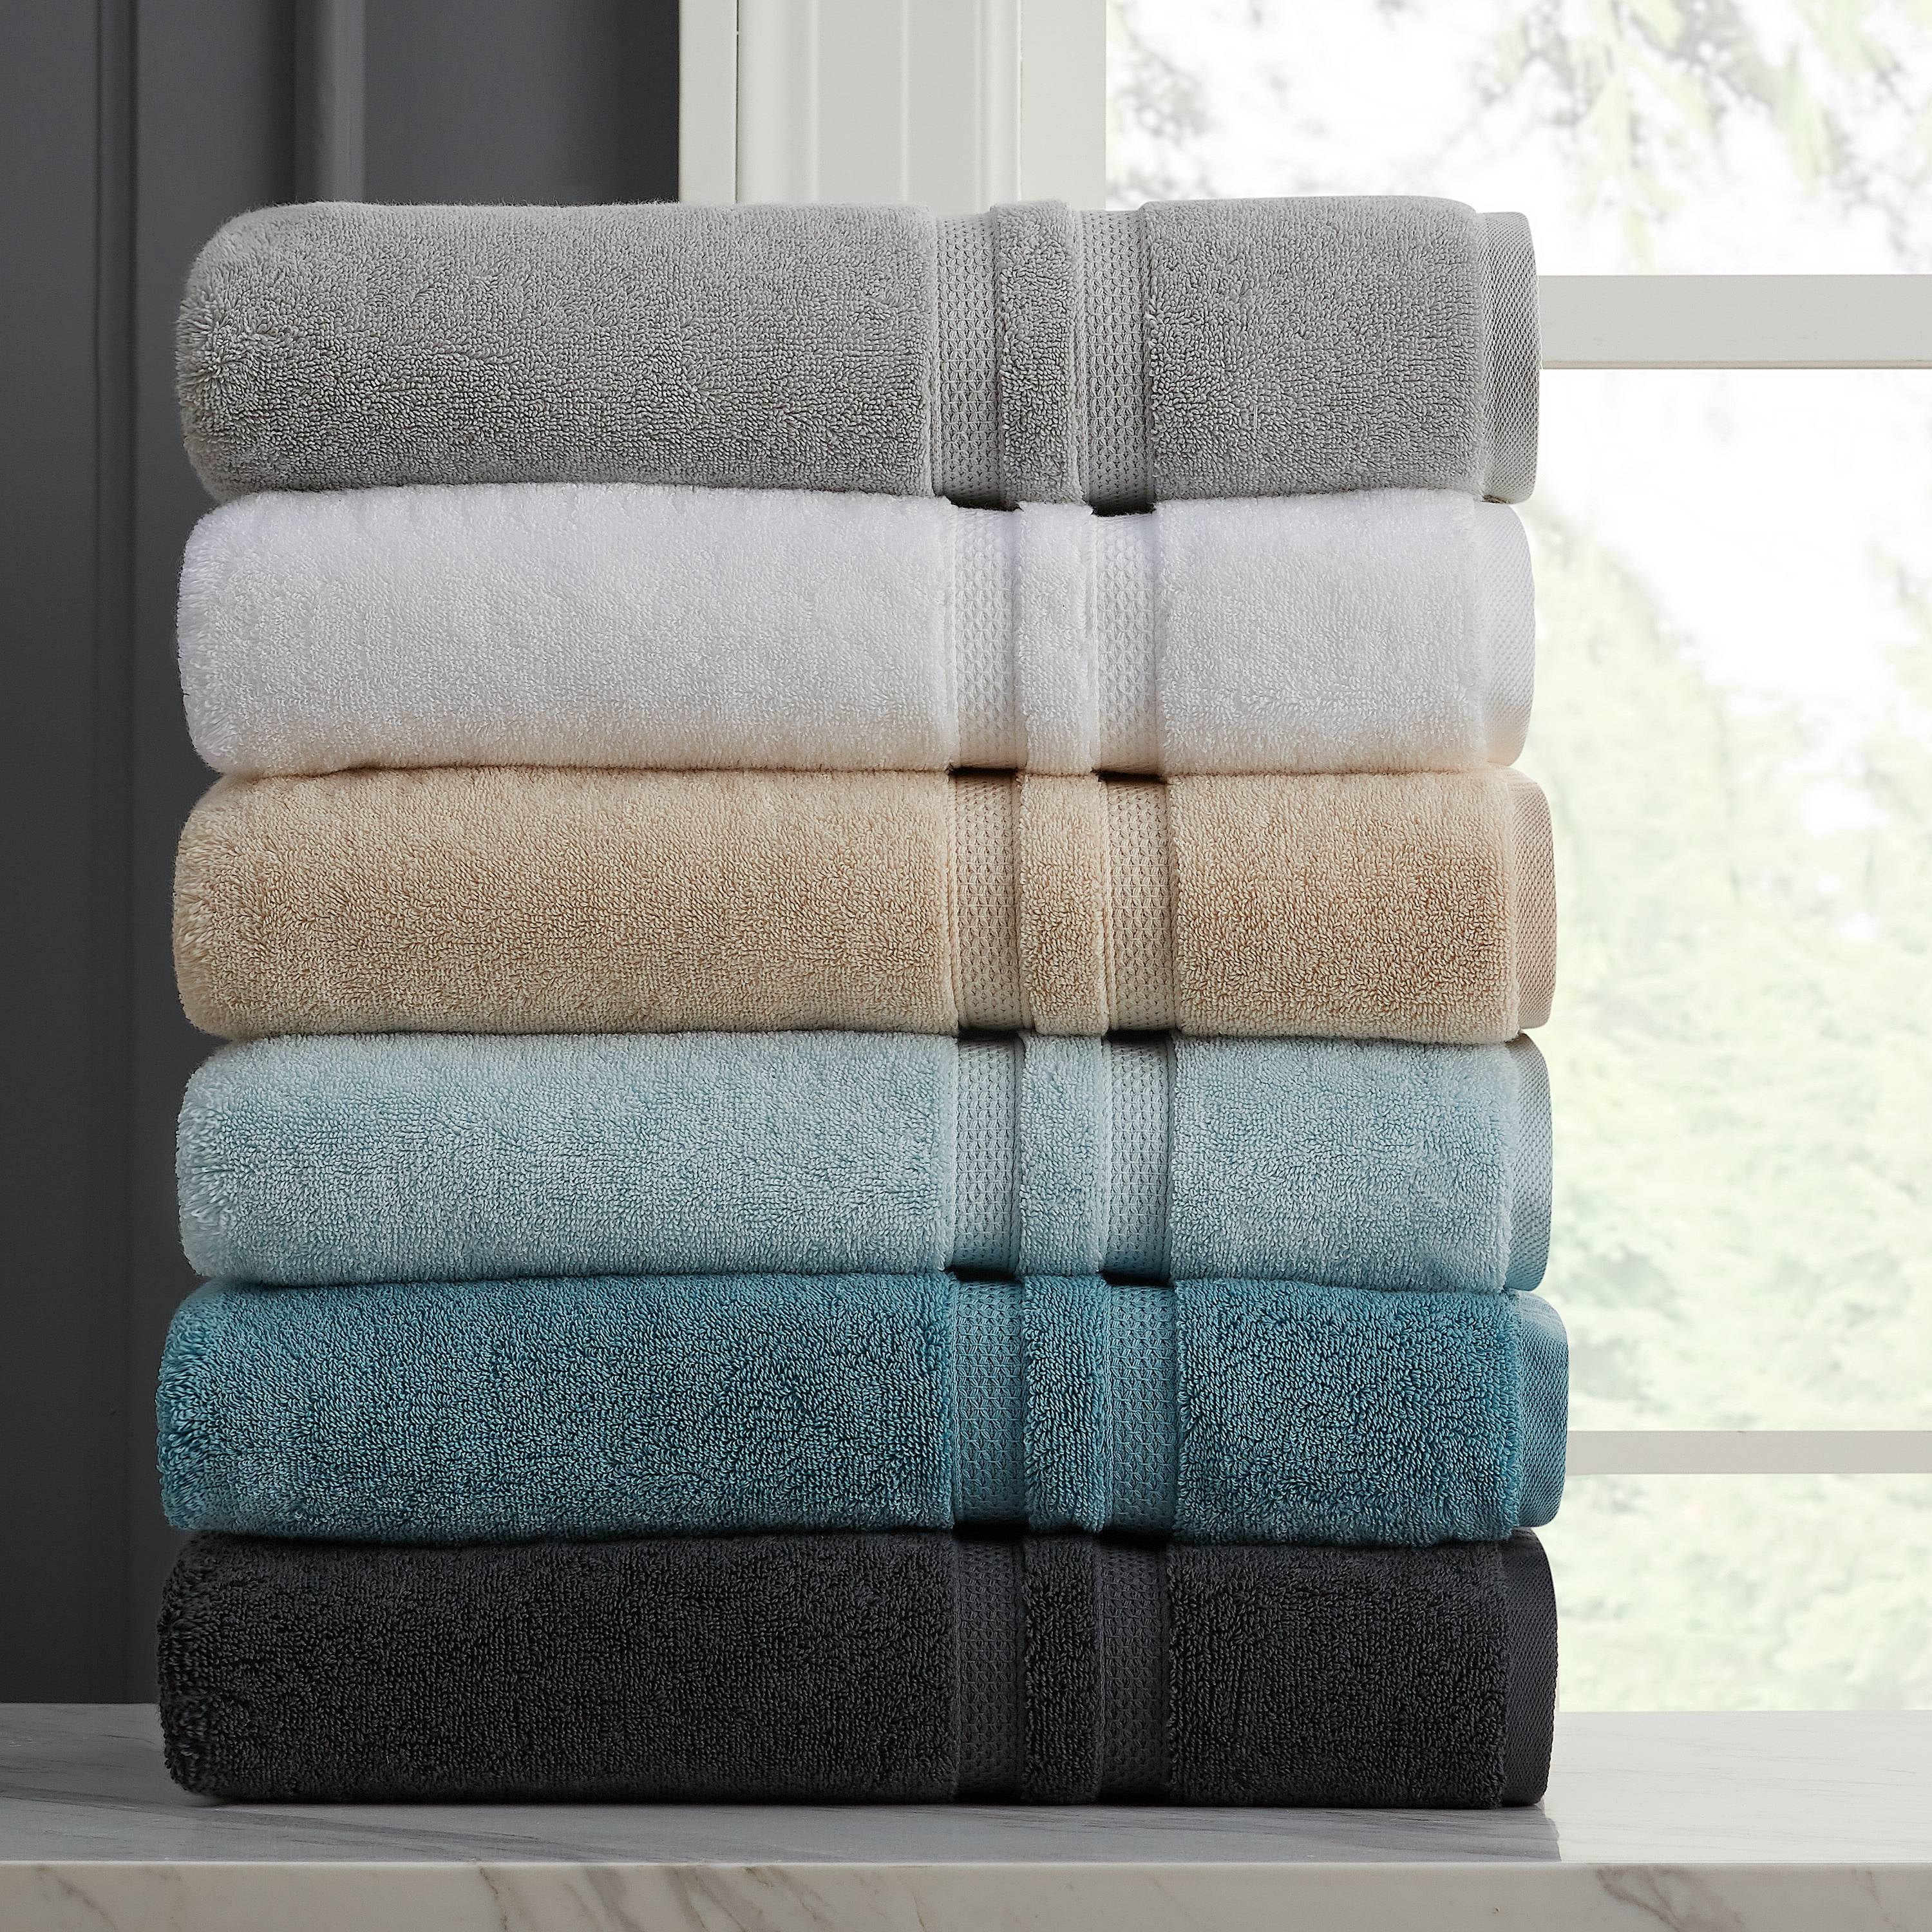 Hotel Style Turkish Cotton Bath Towel Collection Solid Print